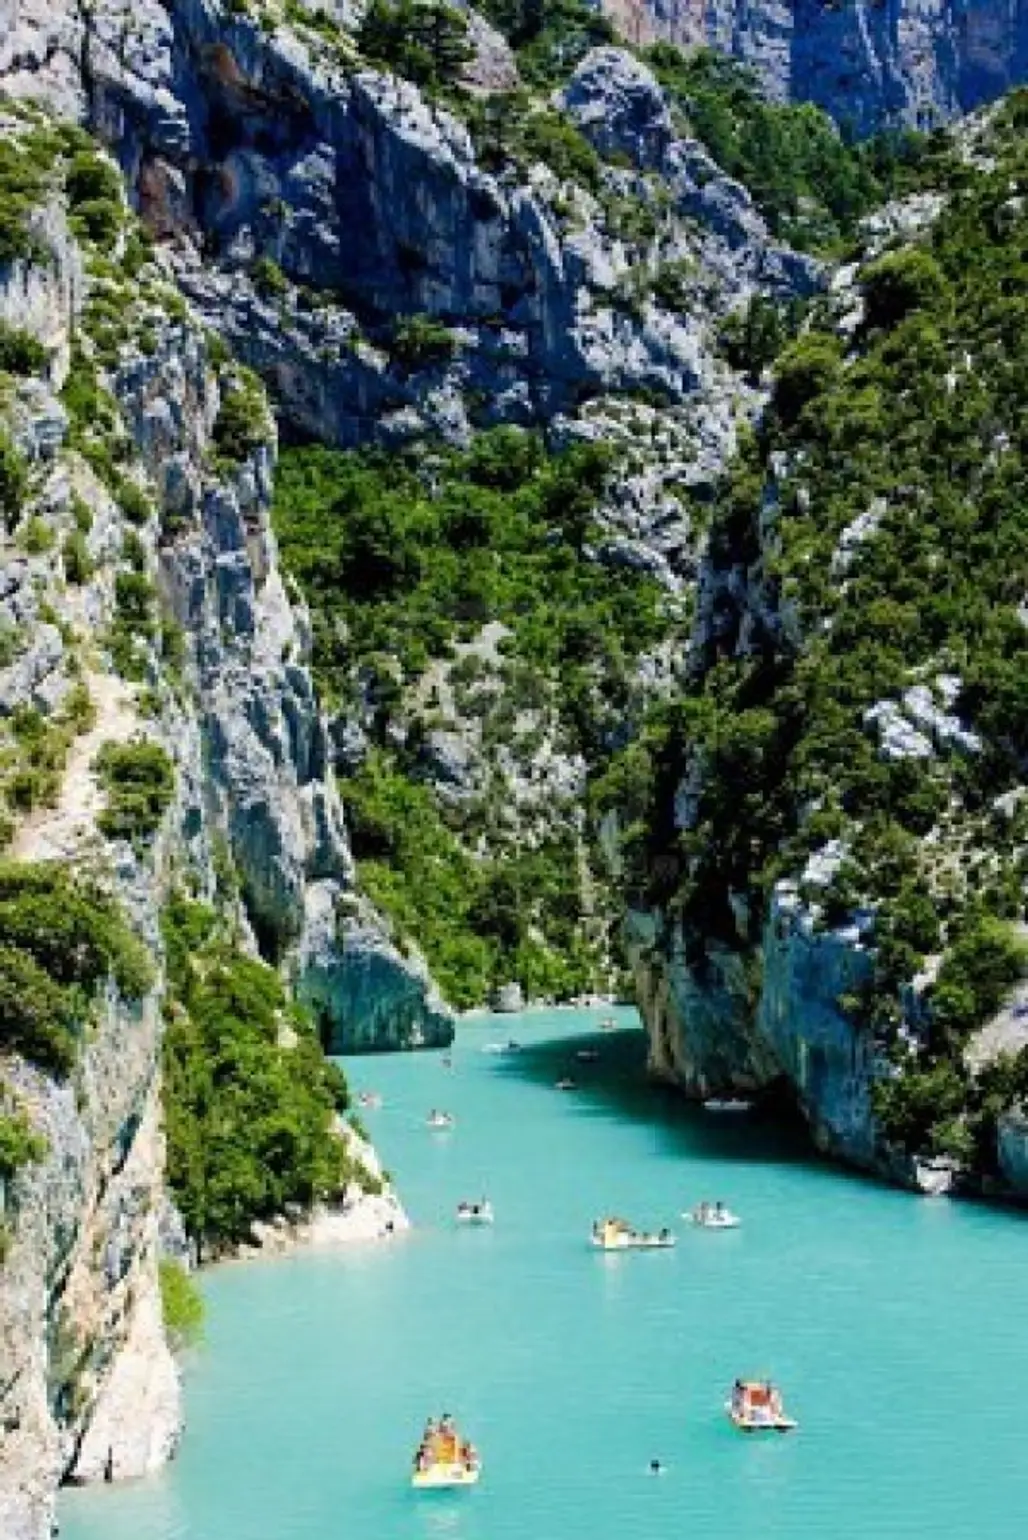 Get Deep down in the Verdon River Gorge